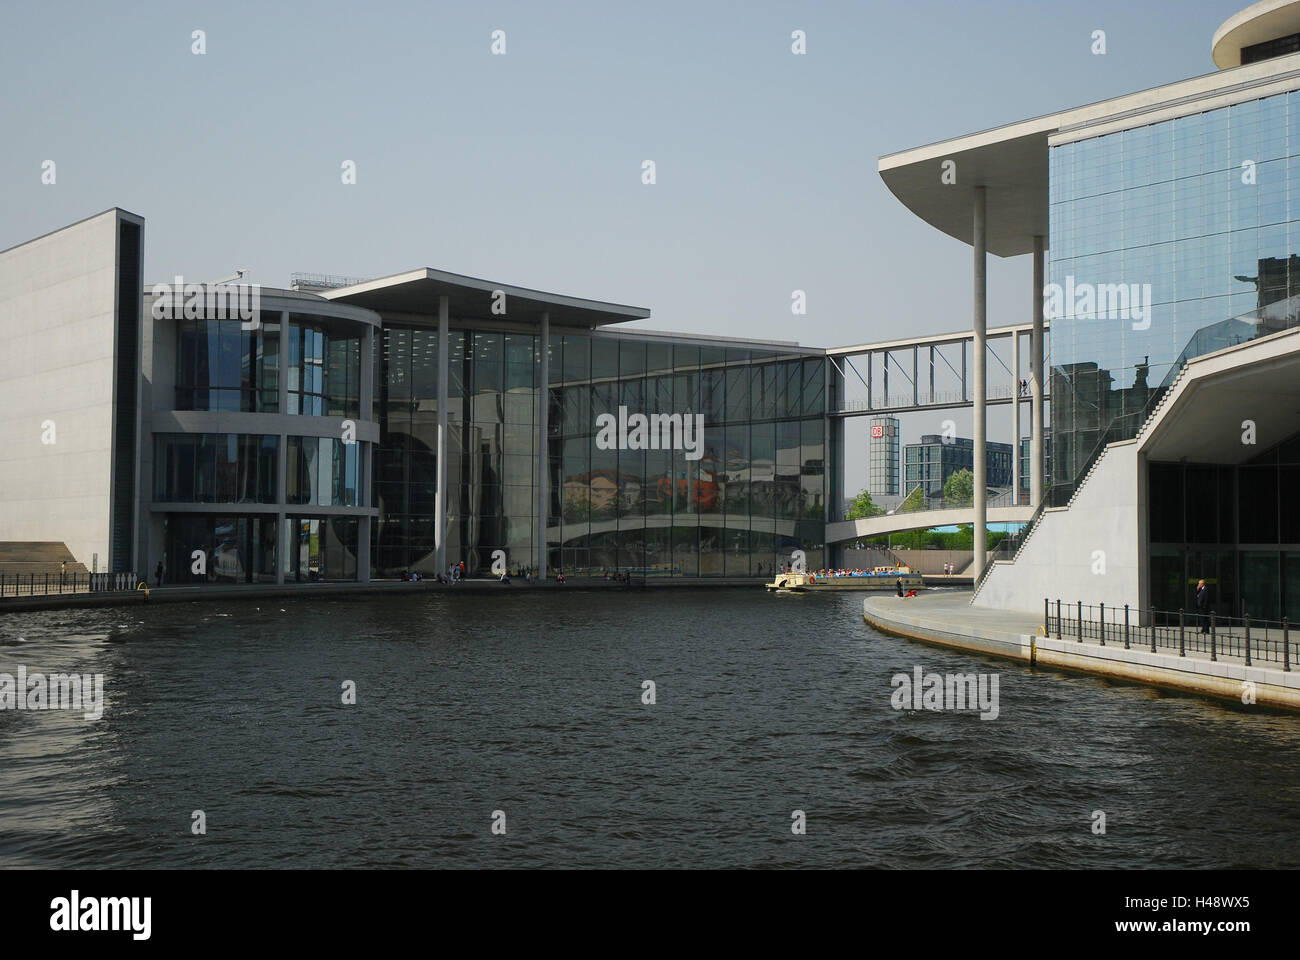 Germany, Berlin, Spree bow, government district, building, architecture, bridge, town, capital, the Spree, excursion boat, facades, glass fronts, architecture, footbridge, river, Stock Photo